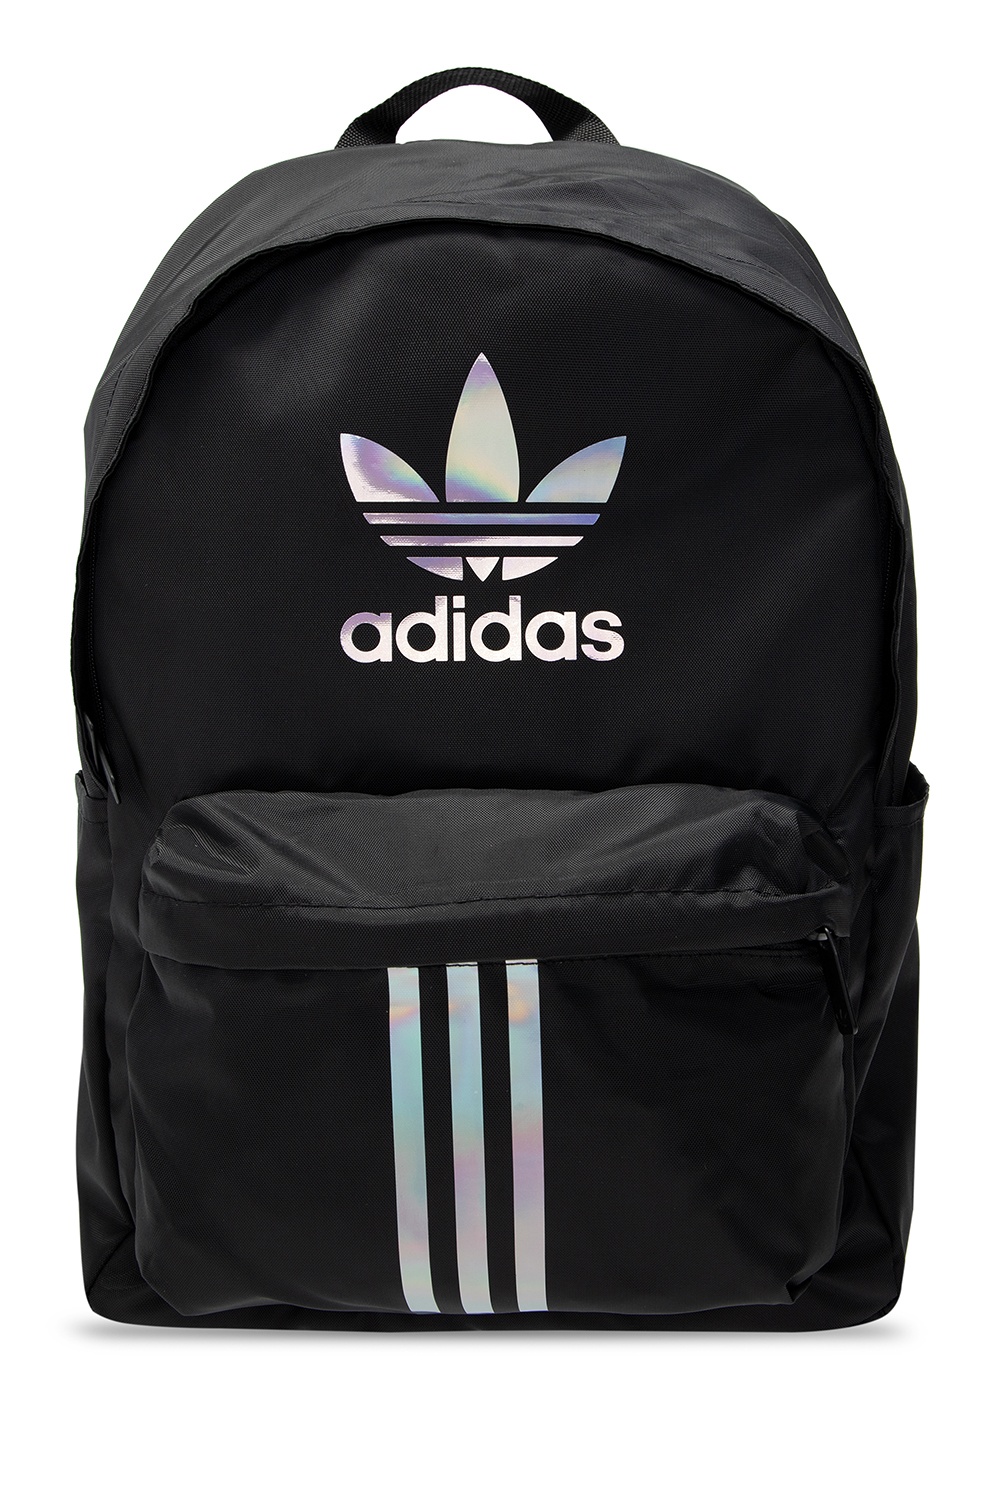 adidas backpack ross